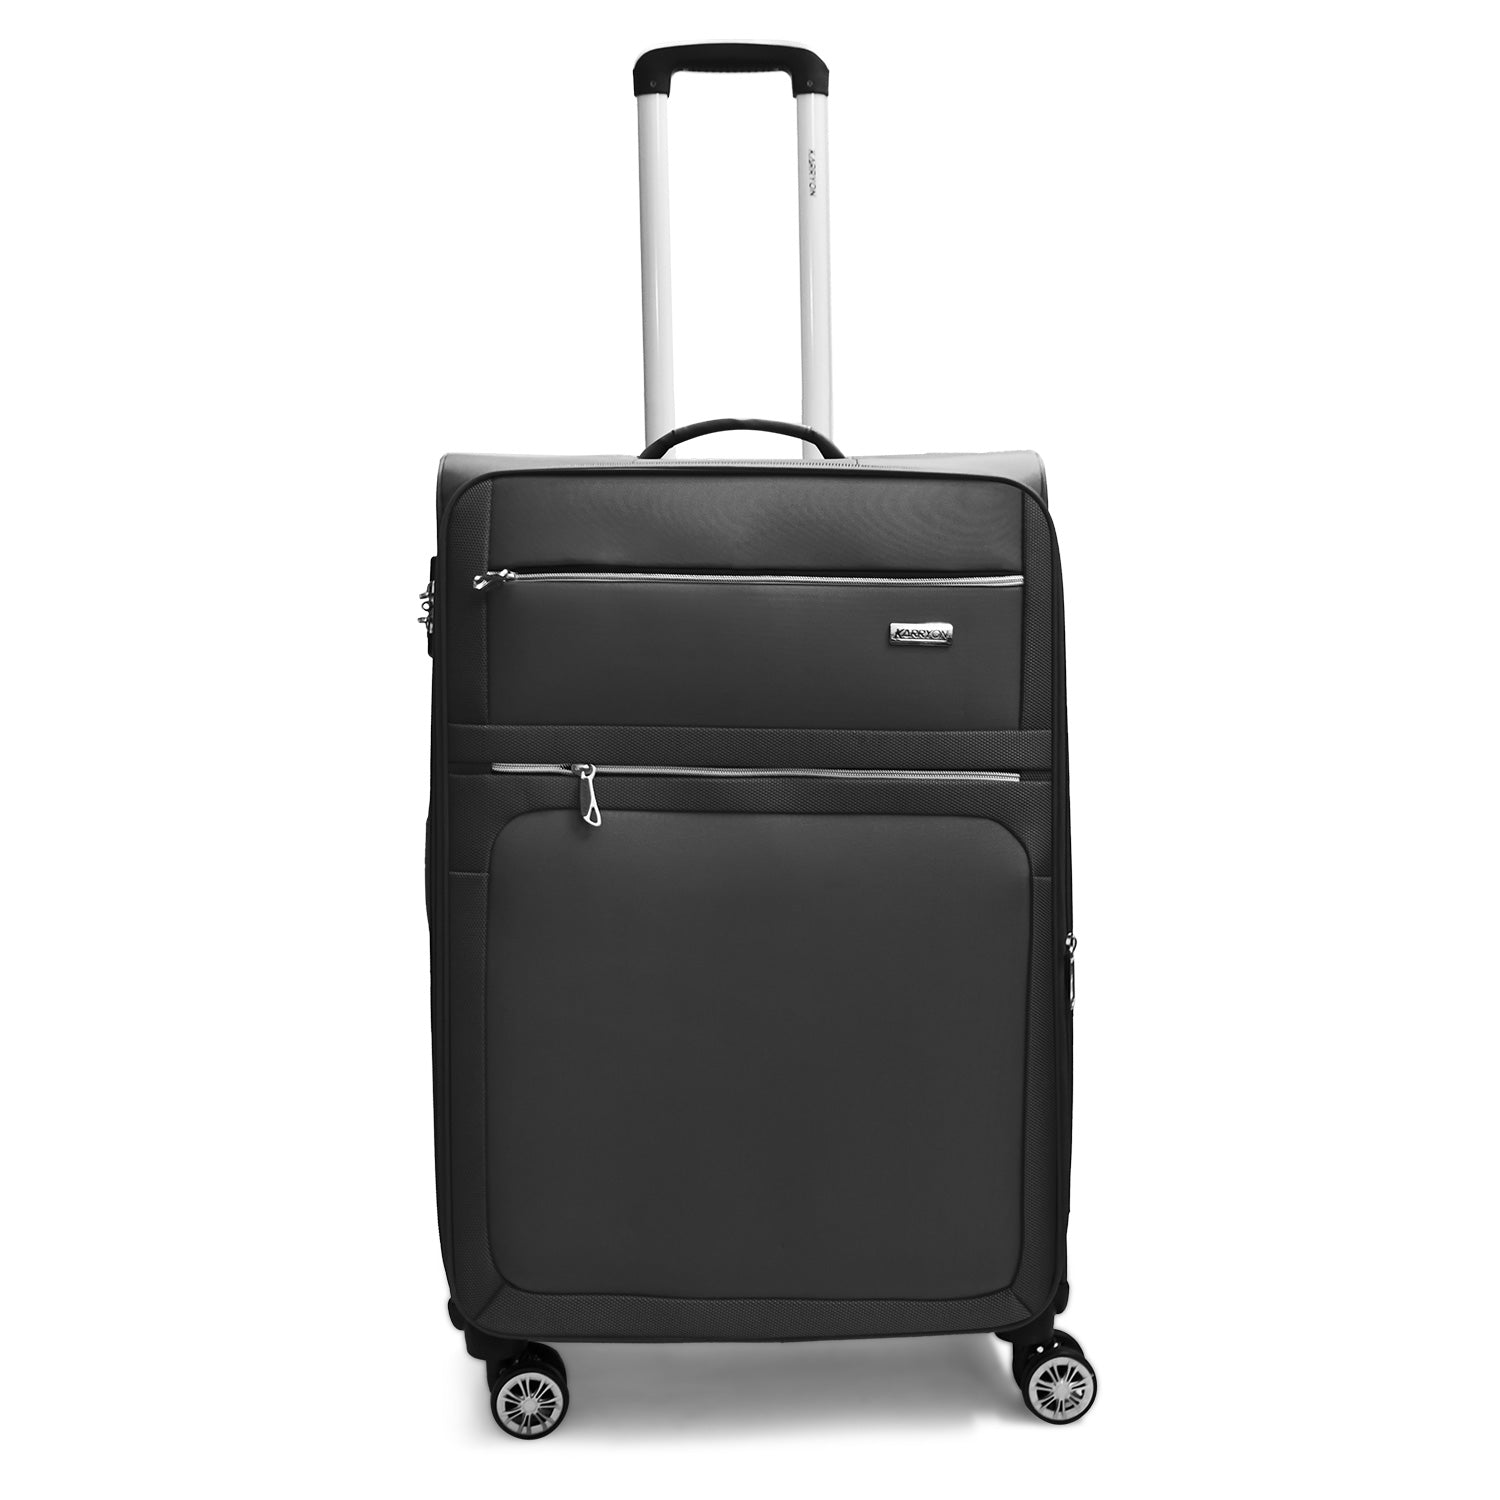 KARRY-ON AIREA DOUBLE WHEELED LUGGAGE